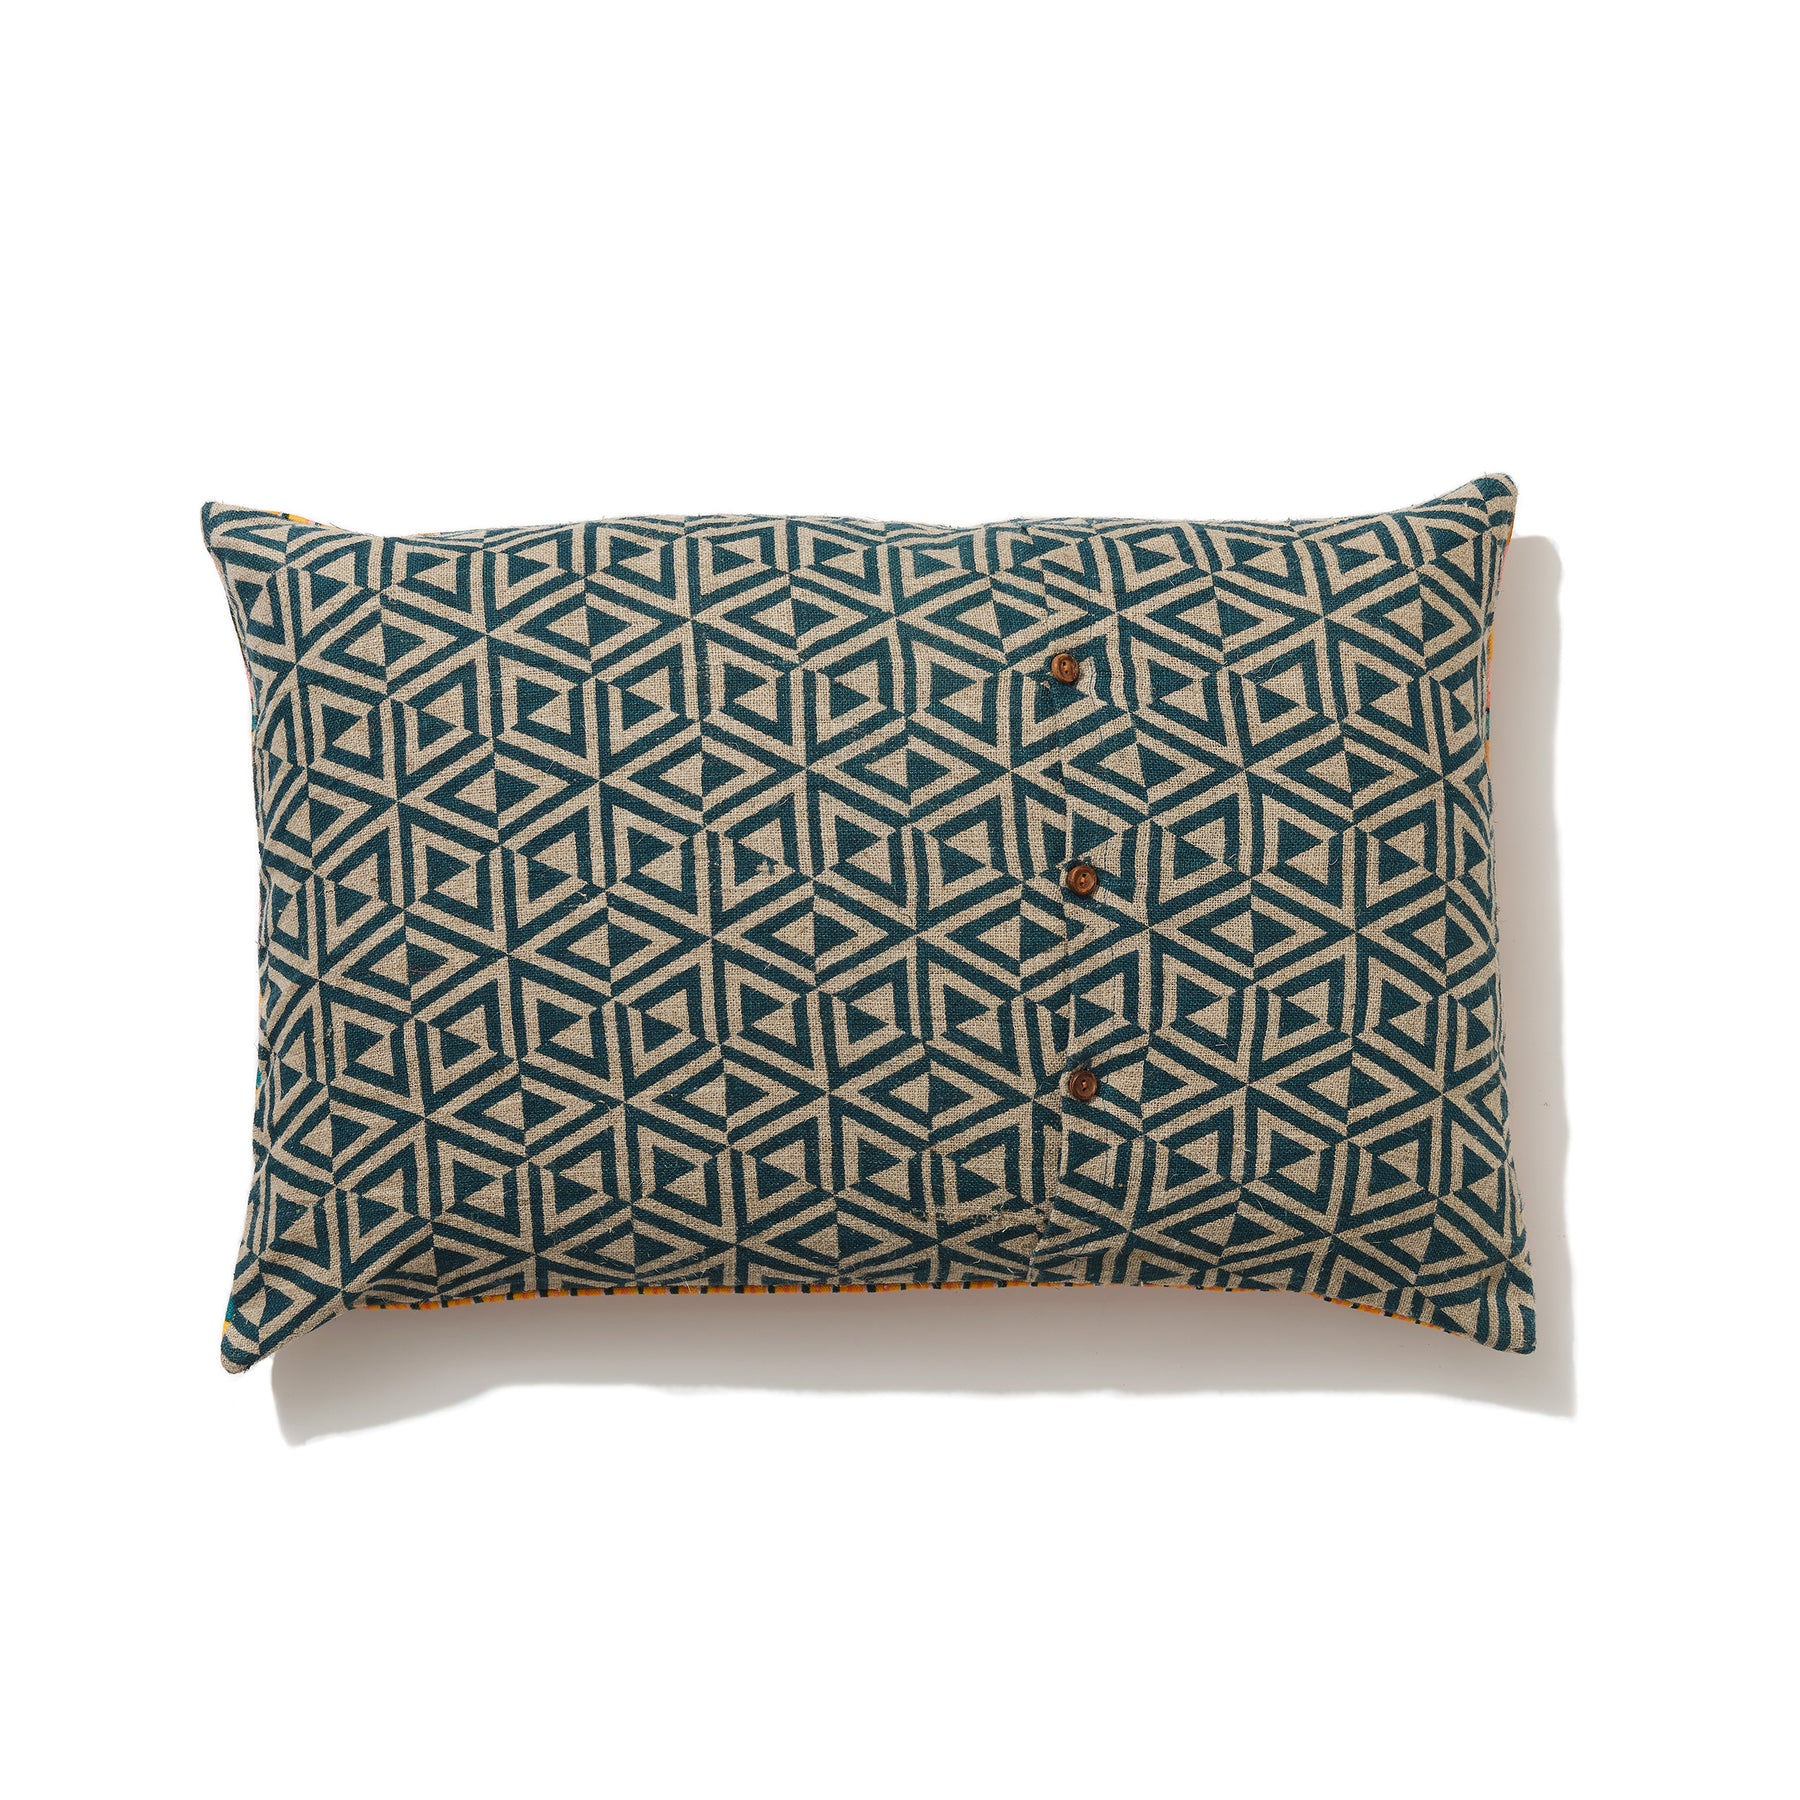 Rectangular teal honeycomb linen and row of soldiers cotton cushion 40 x 60cm